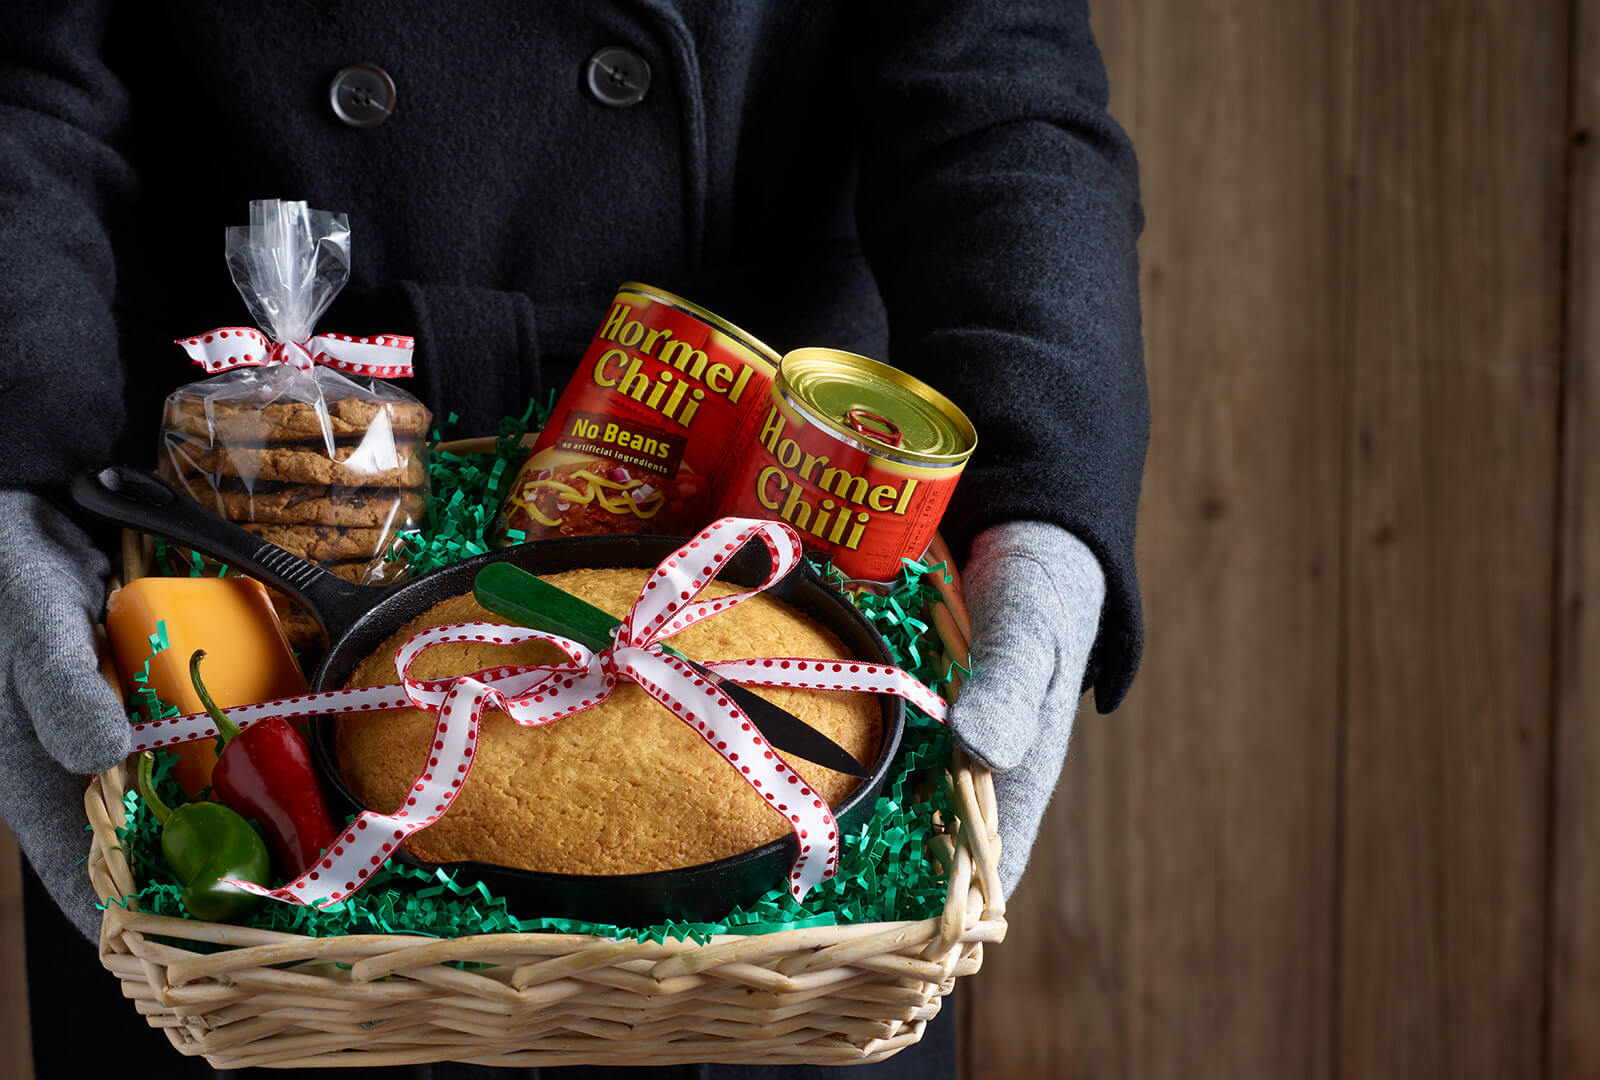 Holiday Basket Ideas Your Friends and Family will Love - Inspired